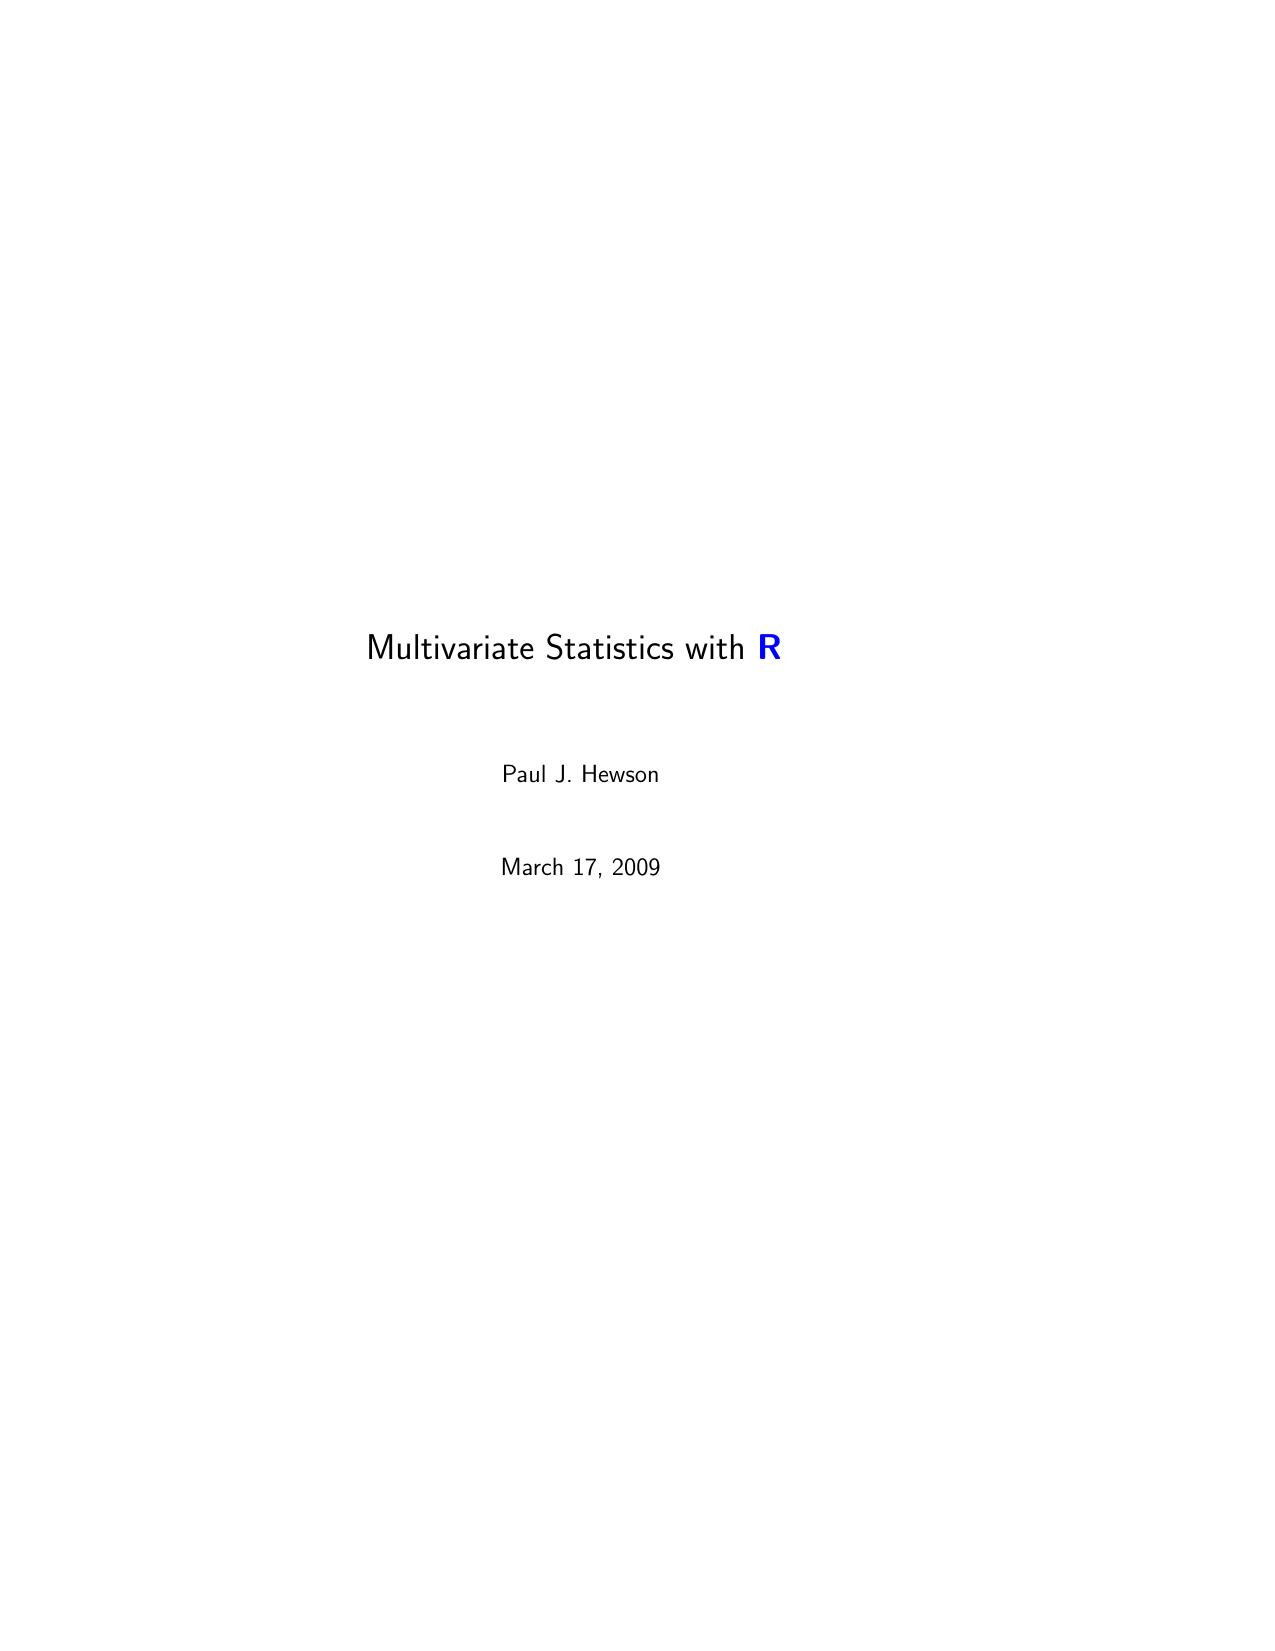 Multivariate stat with R